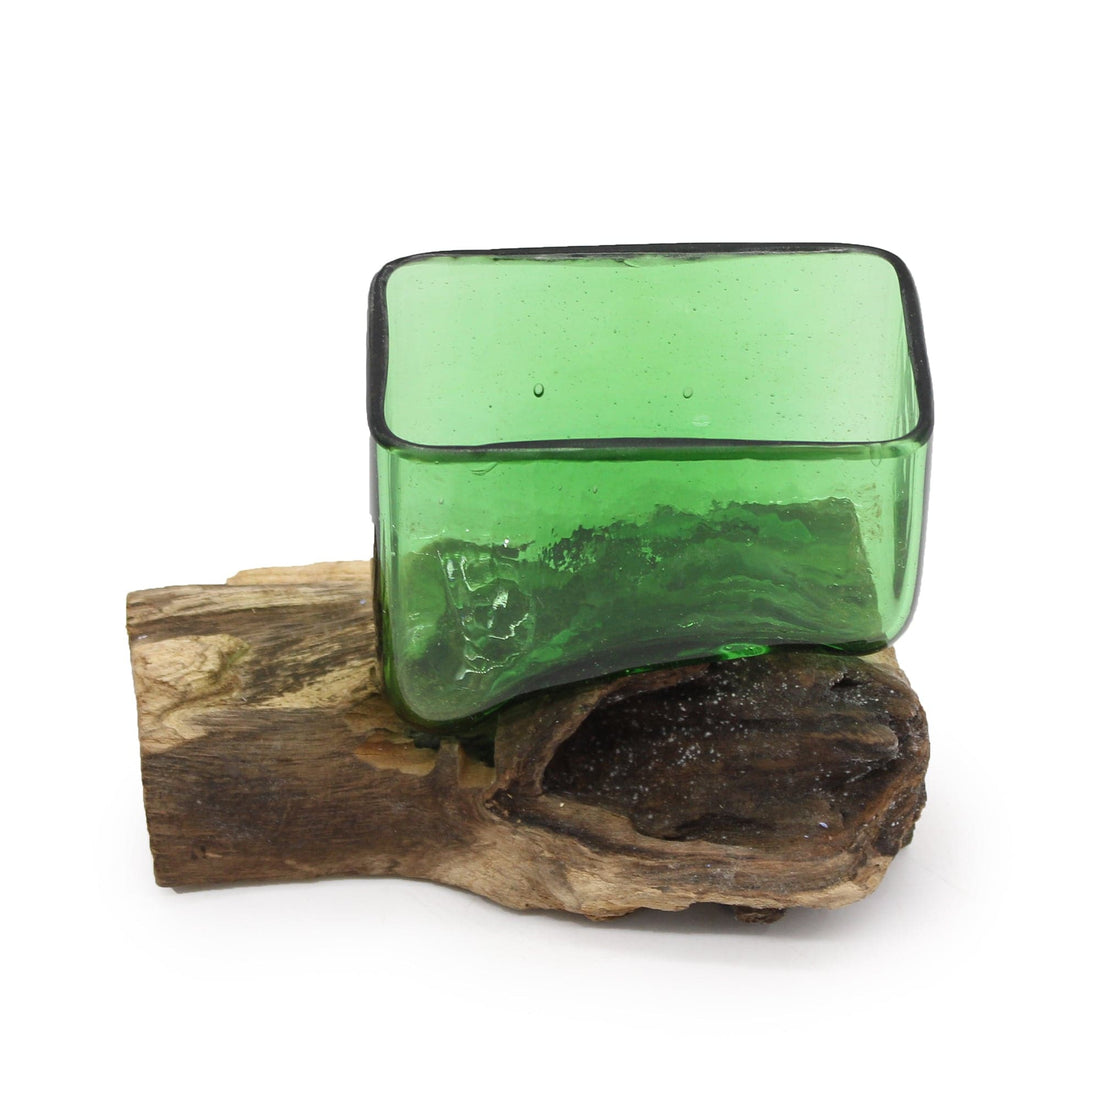 Recycled Beer Bottles - Square Bowl on Wood - best price from Maltashopper.com RBB-04